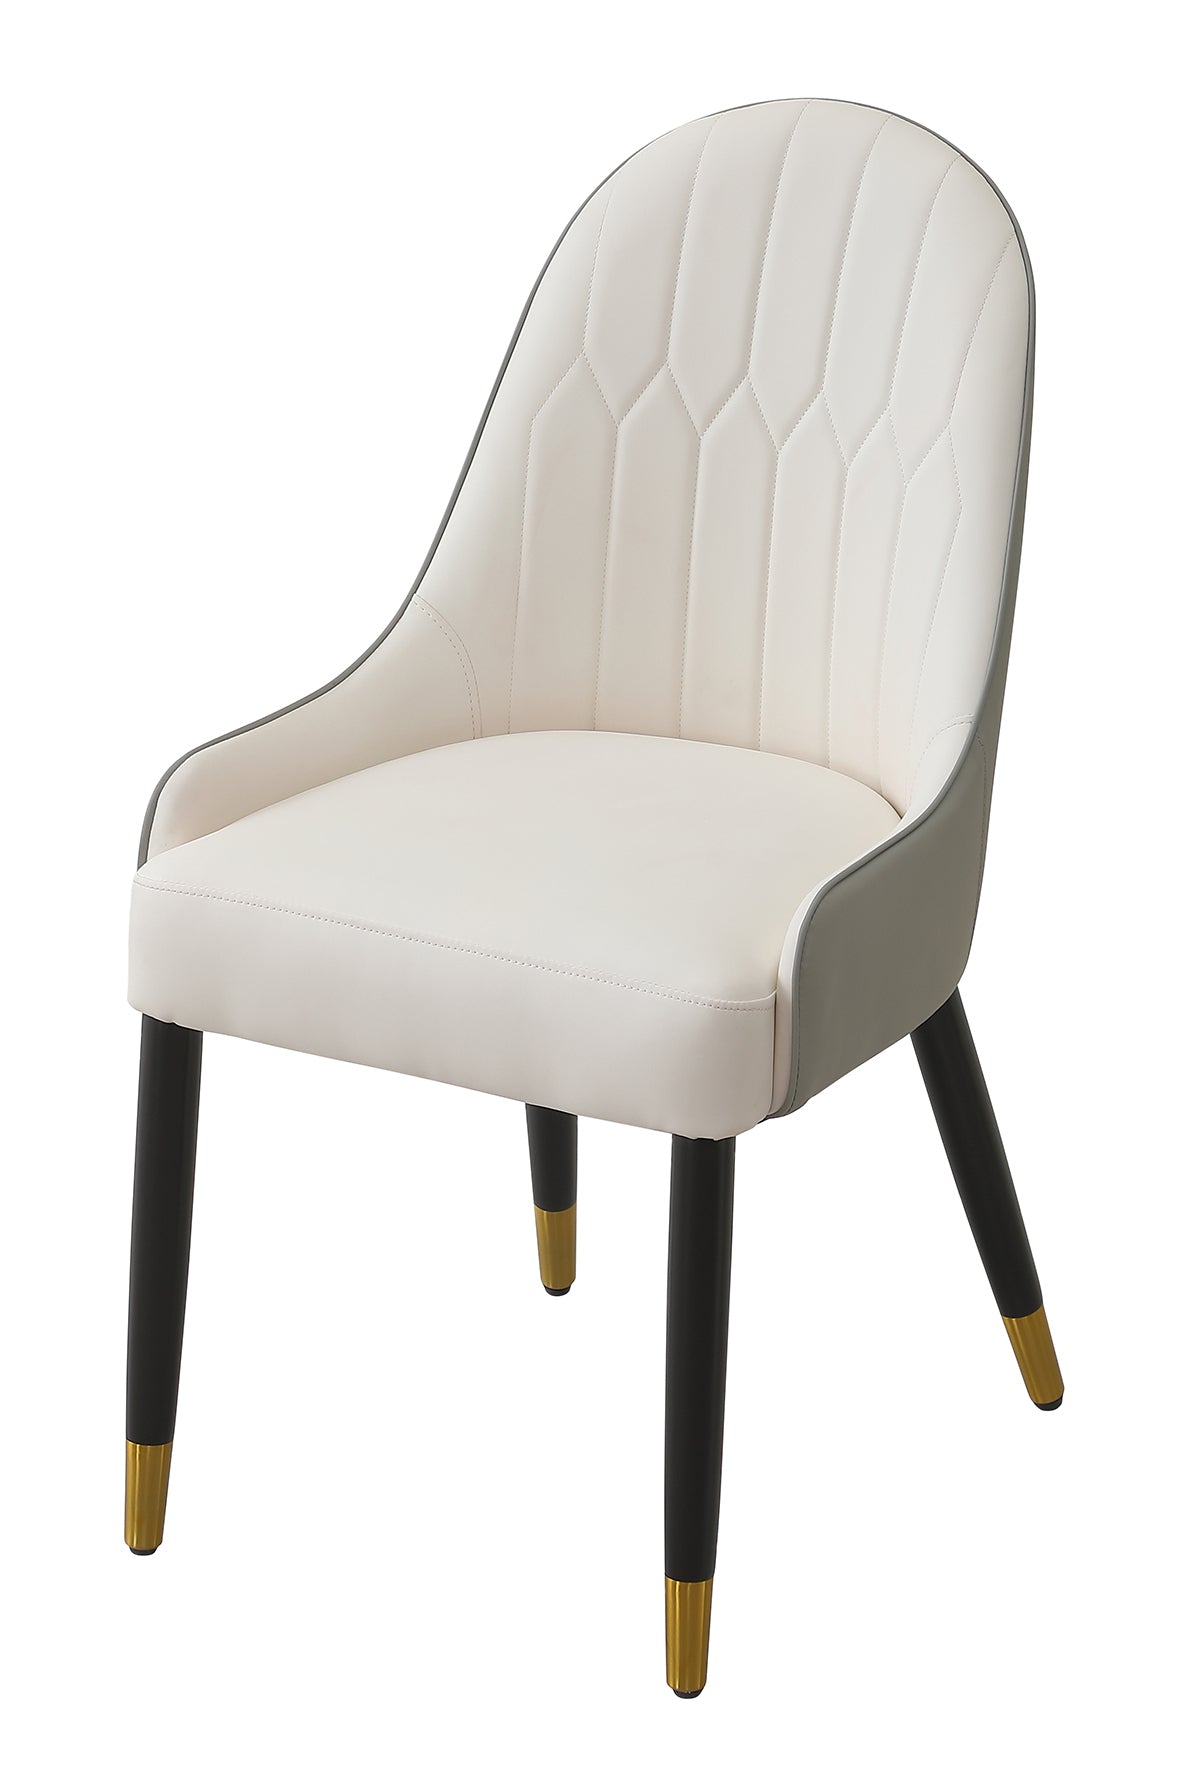 Dining Chair with PU Leather white grey color solid wood metal legs (Set of 2)